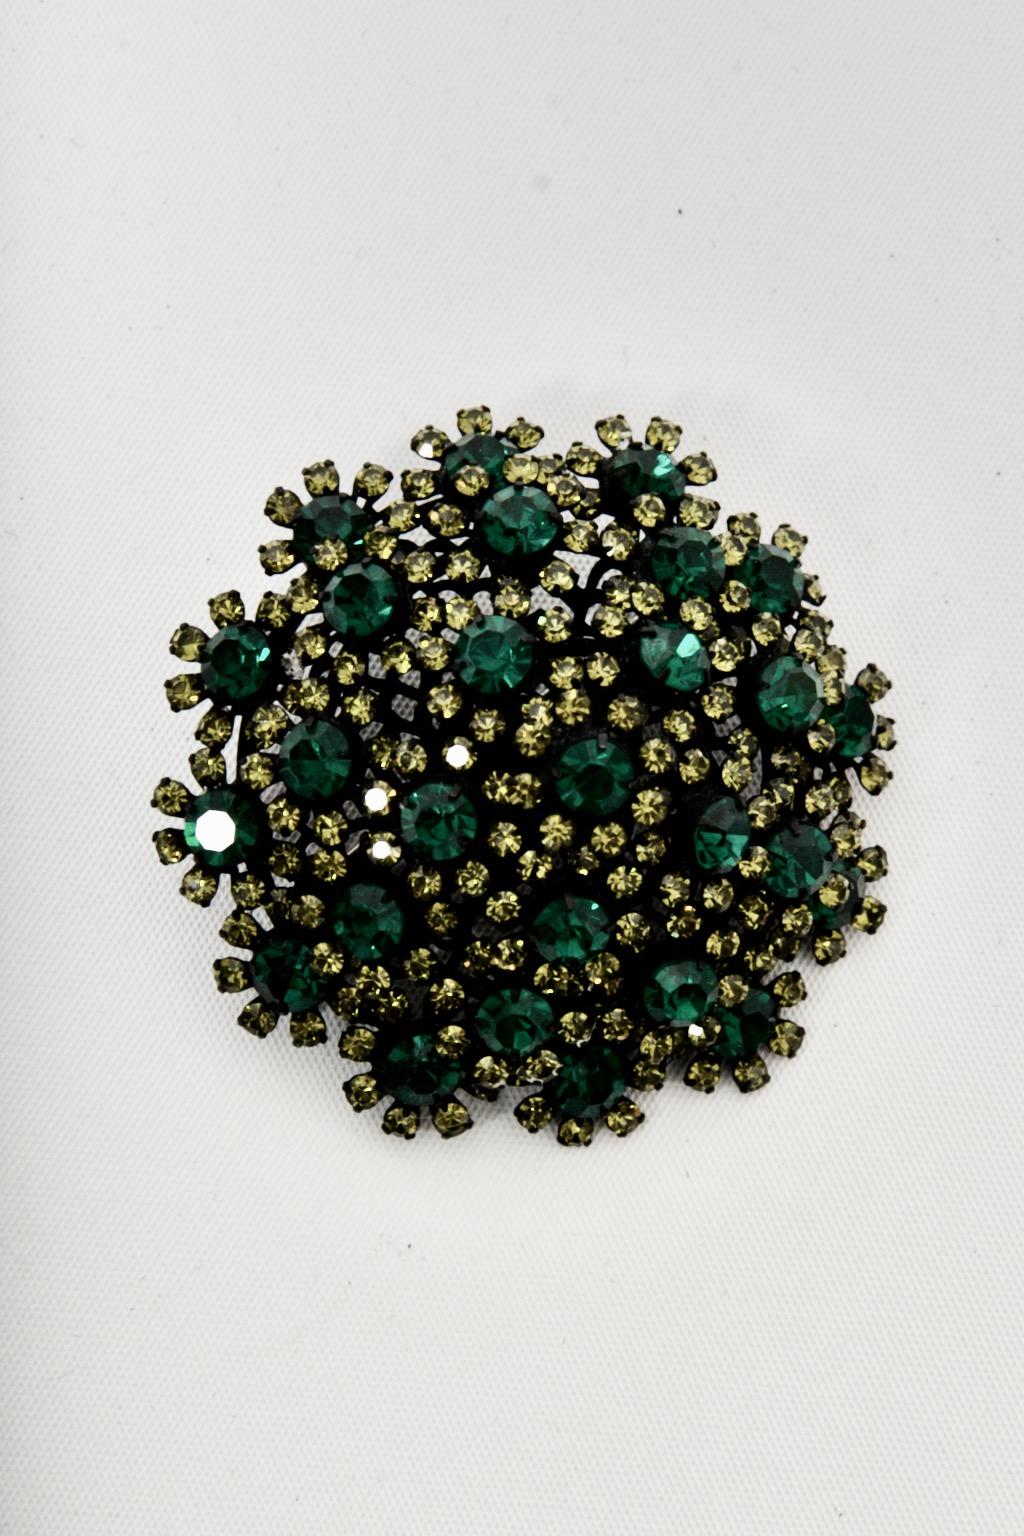 Vendome Emerald and Lime Crystal Brooch and Earrings In Excellent Condition For Sale In Alford, MA